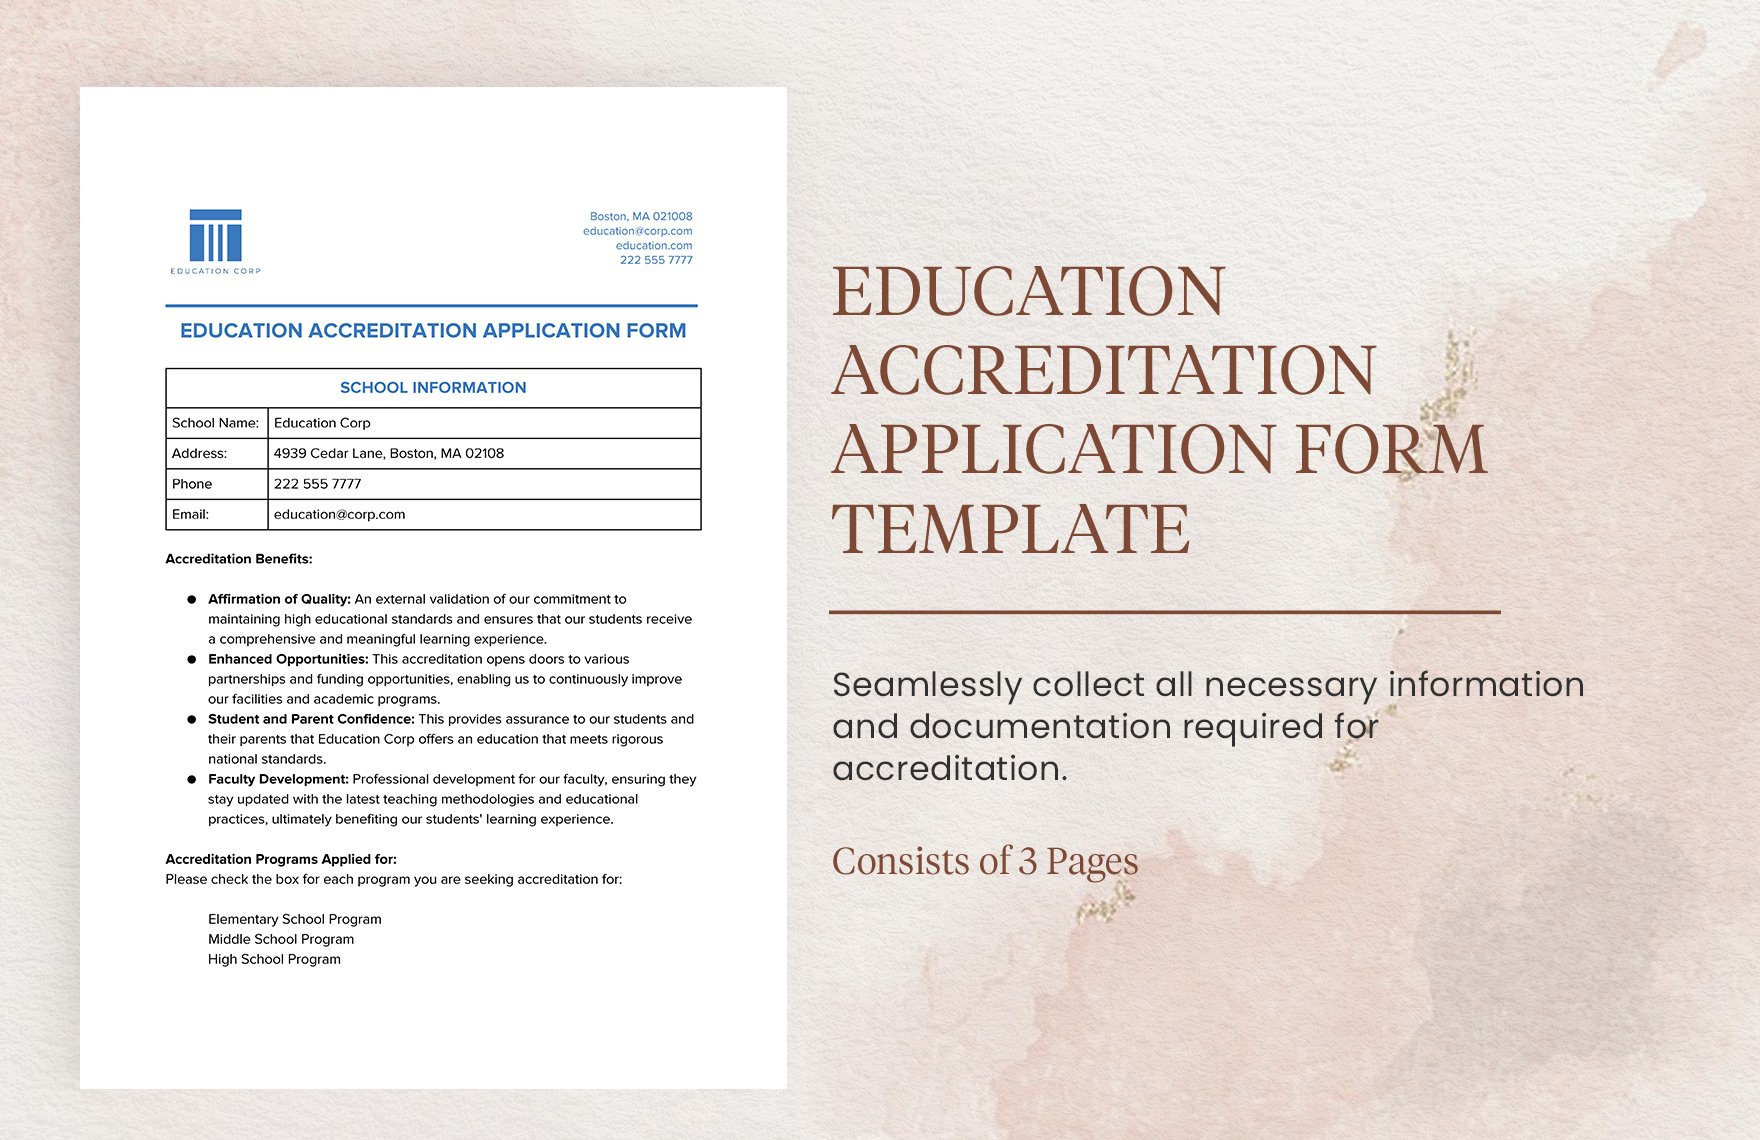 Education Accreditation Application Form Template